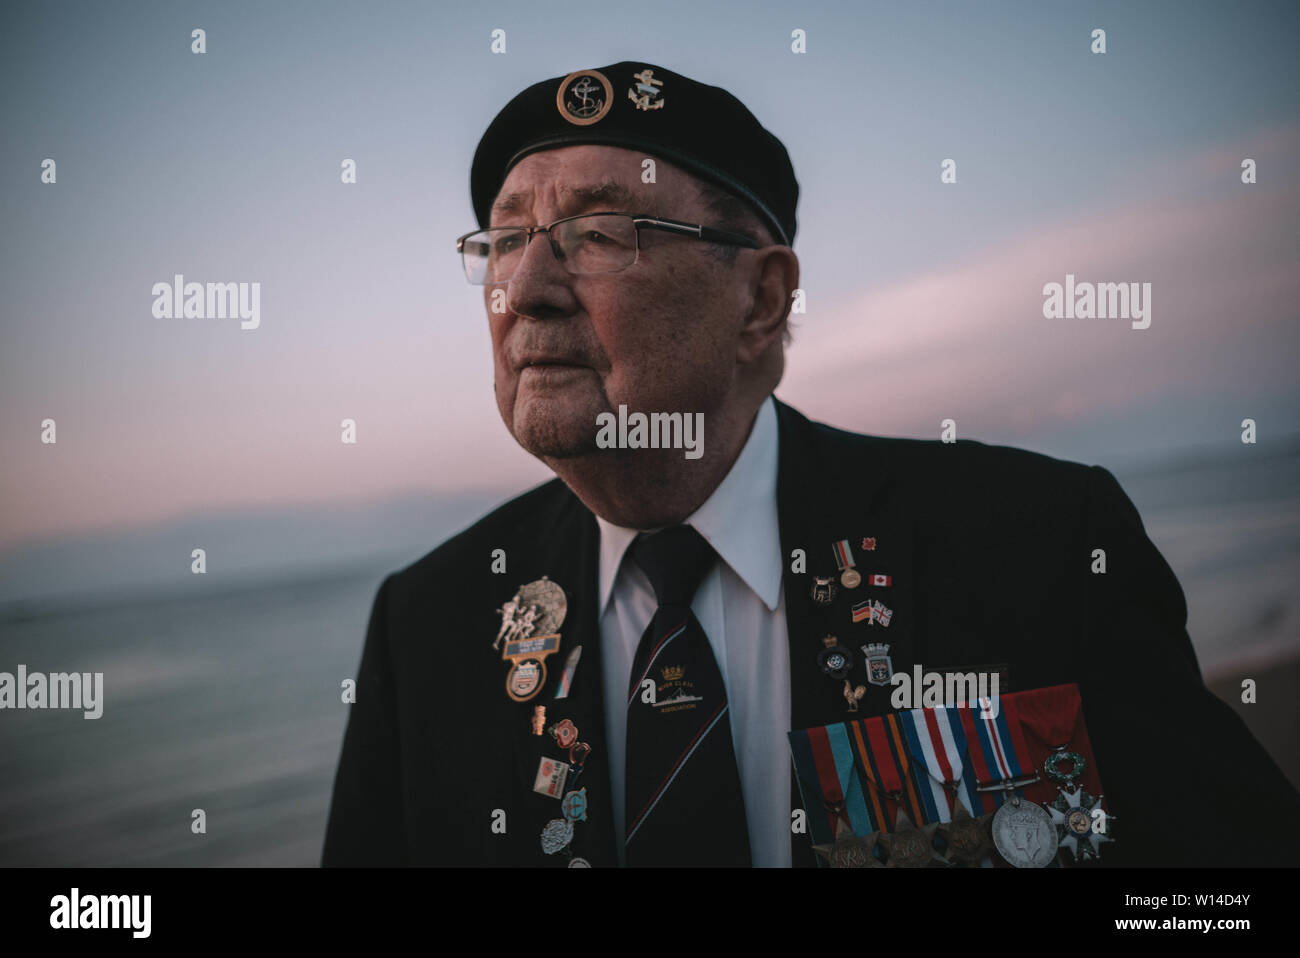 (190630) -- BEIJING, June 30, 2019 (Xinhua) -- A veteran attends an event to mark the 75th anniversary of the D-Day landing in Normandy, France, June 4, 2019. (Xinhua/Chen Yin) Stock Photo